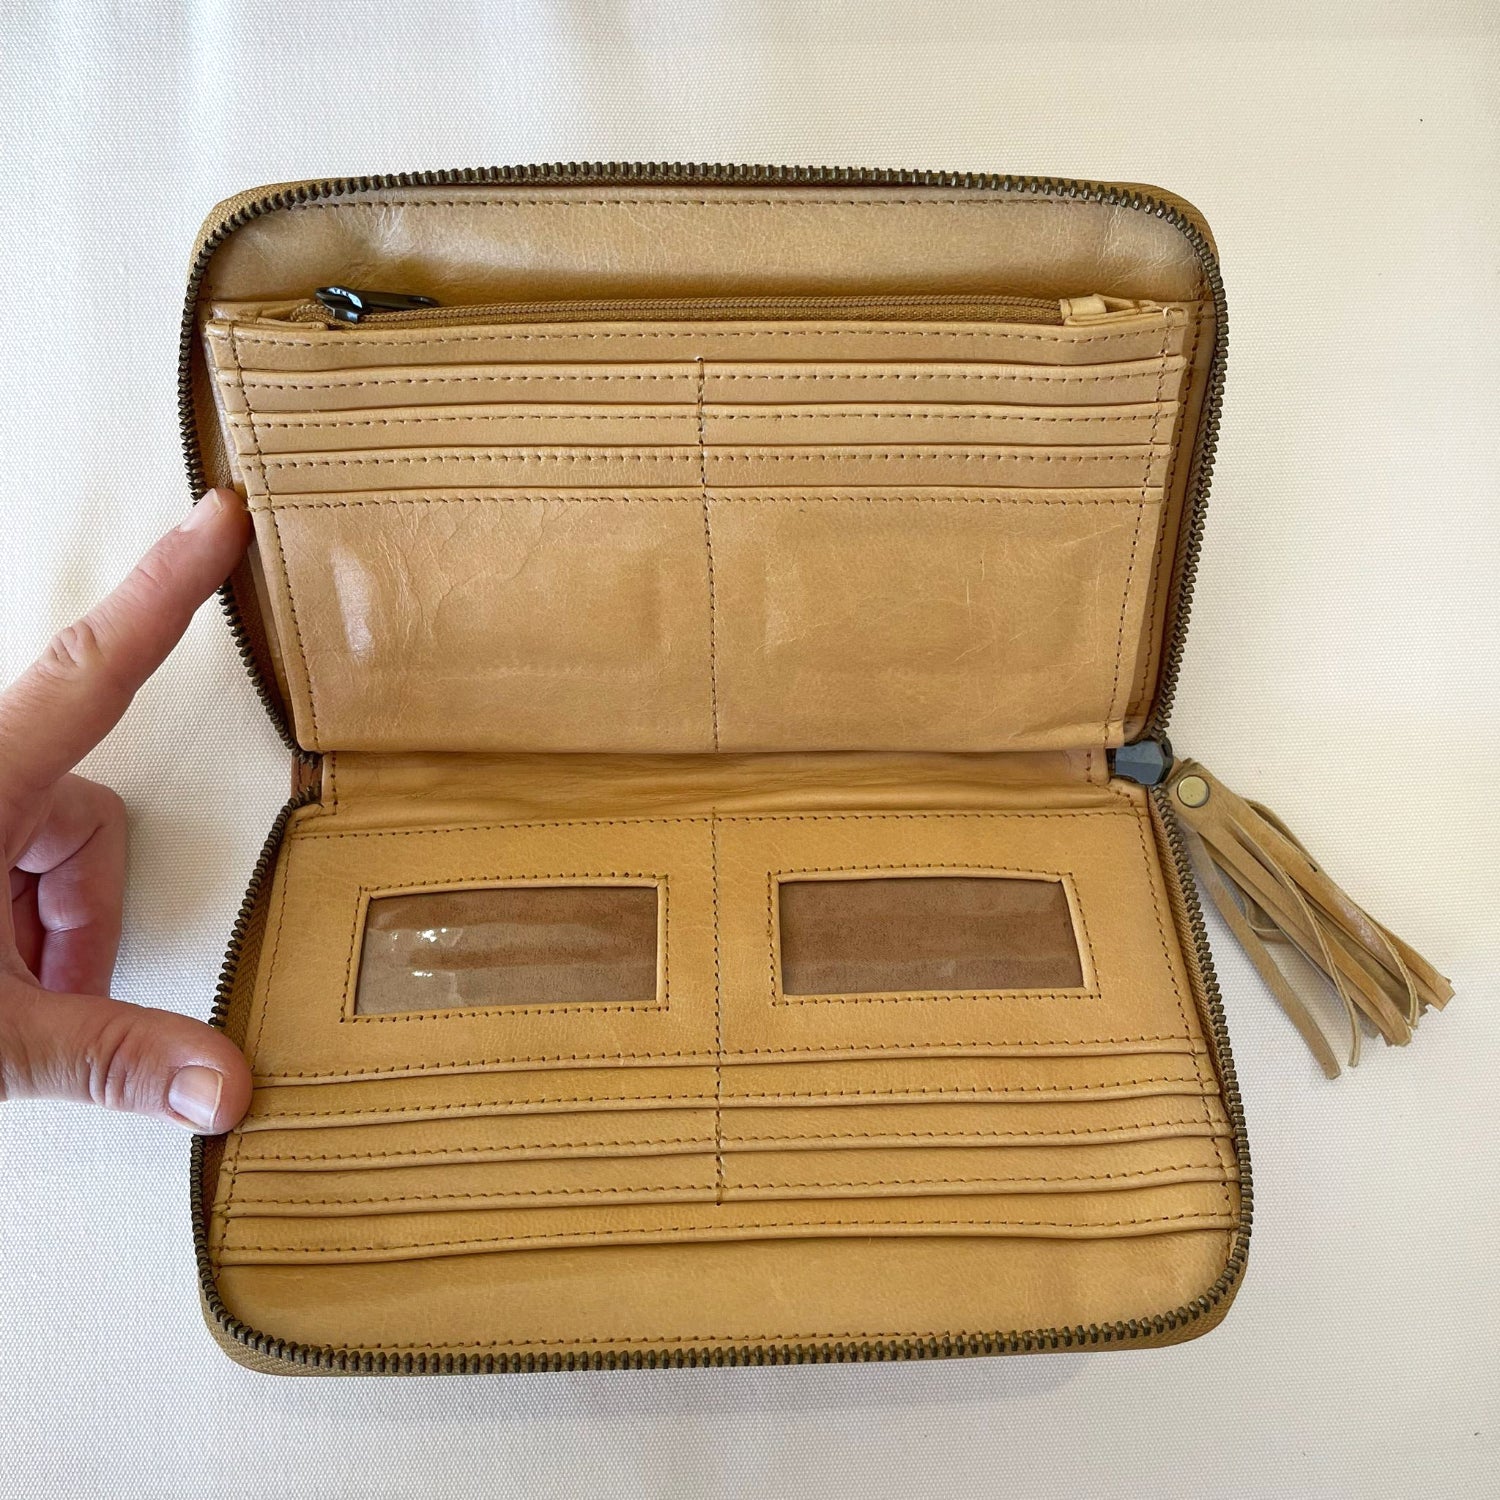 Feather Tan Leather Wallet